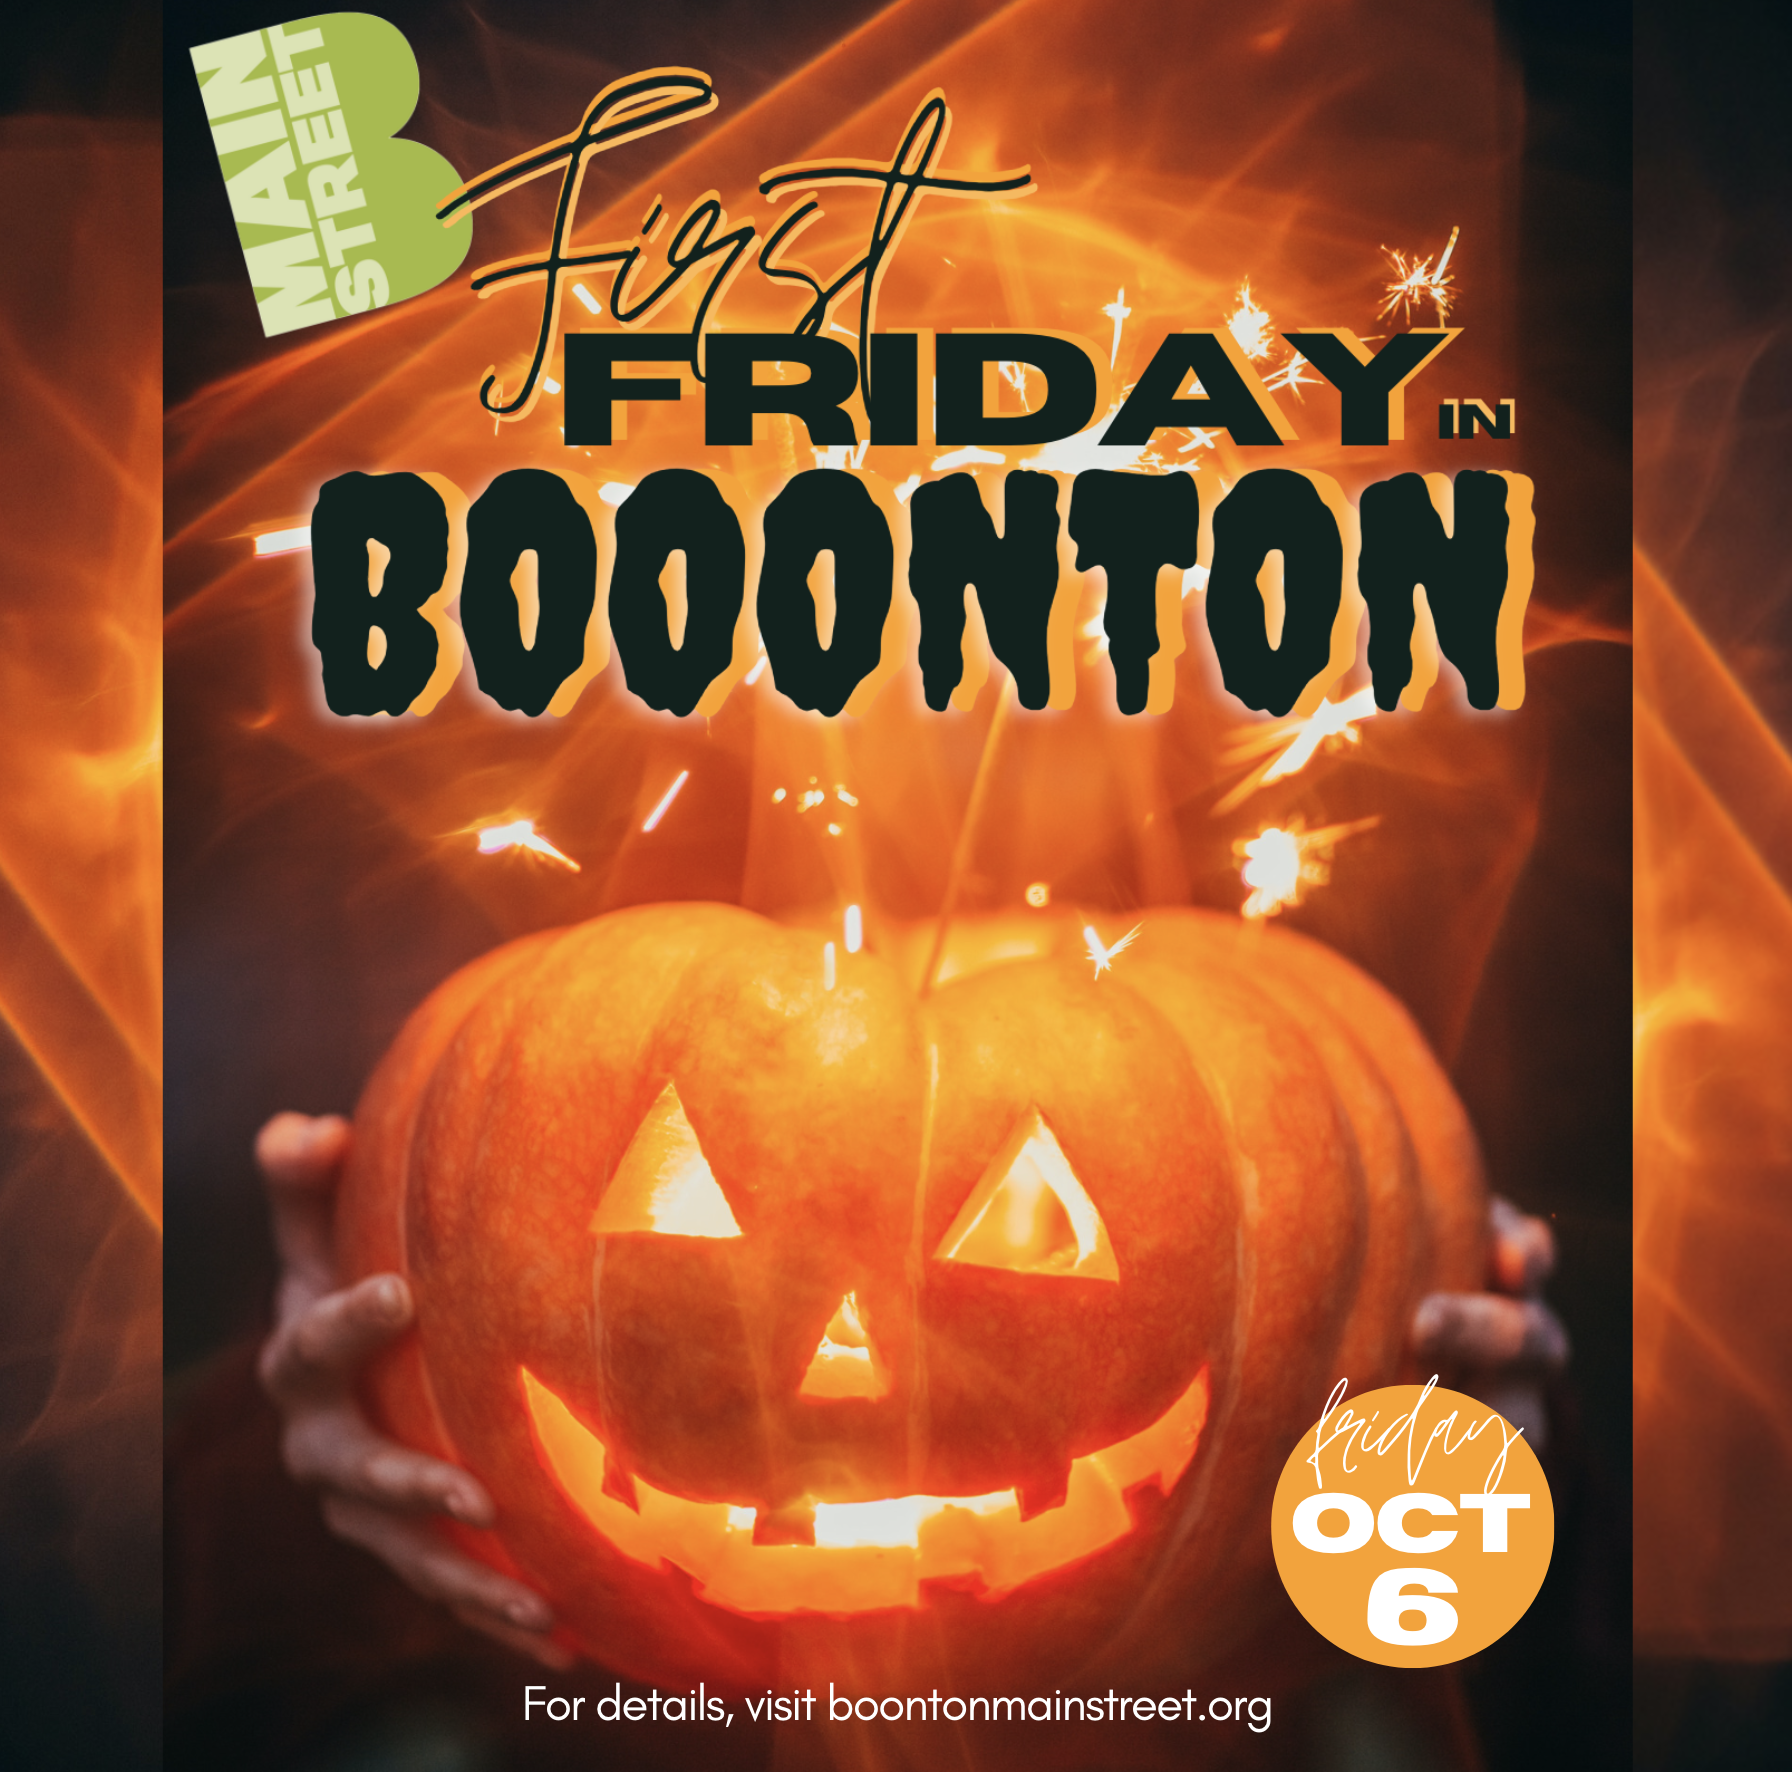 Music on Main: Spooky Sights & Sounds. First Friday in Boonton